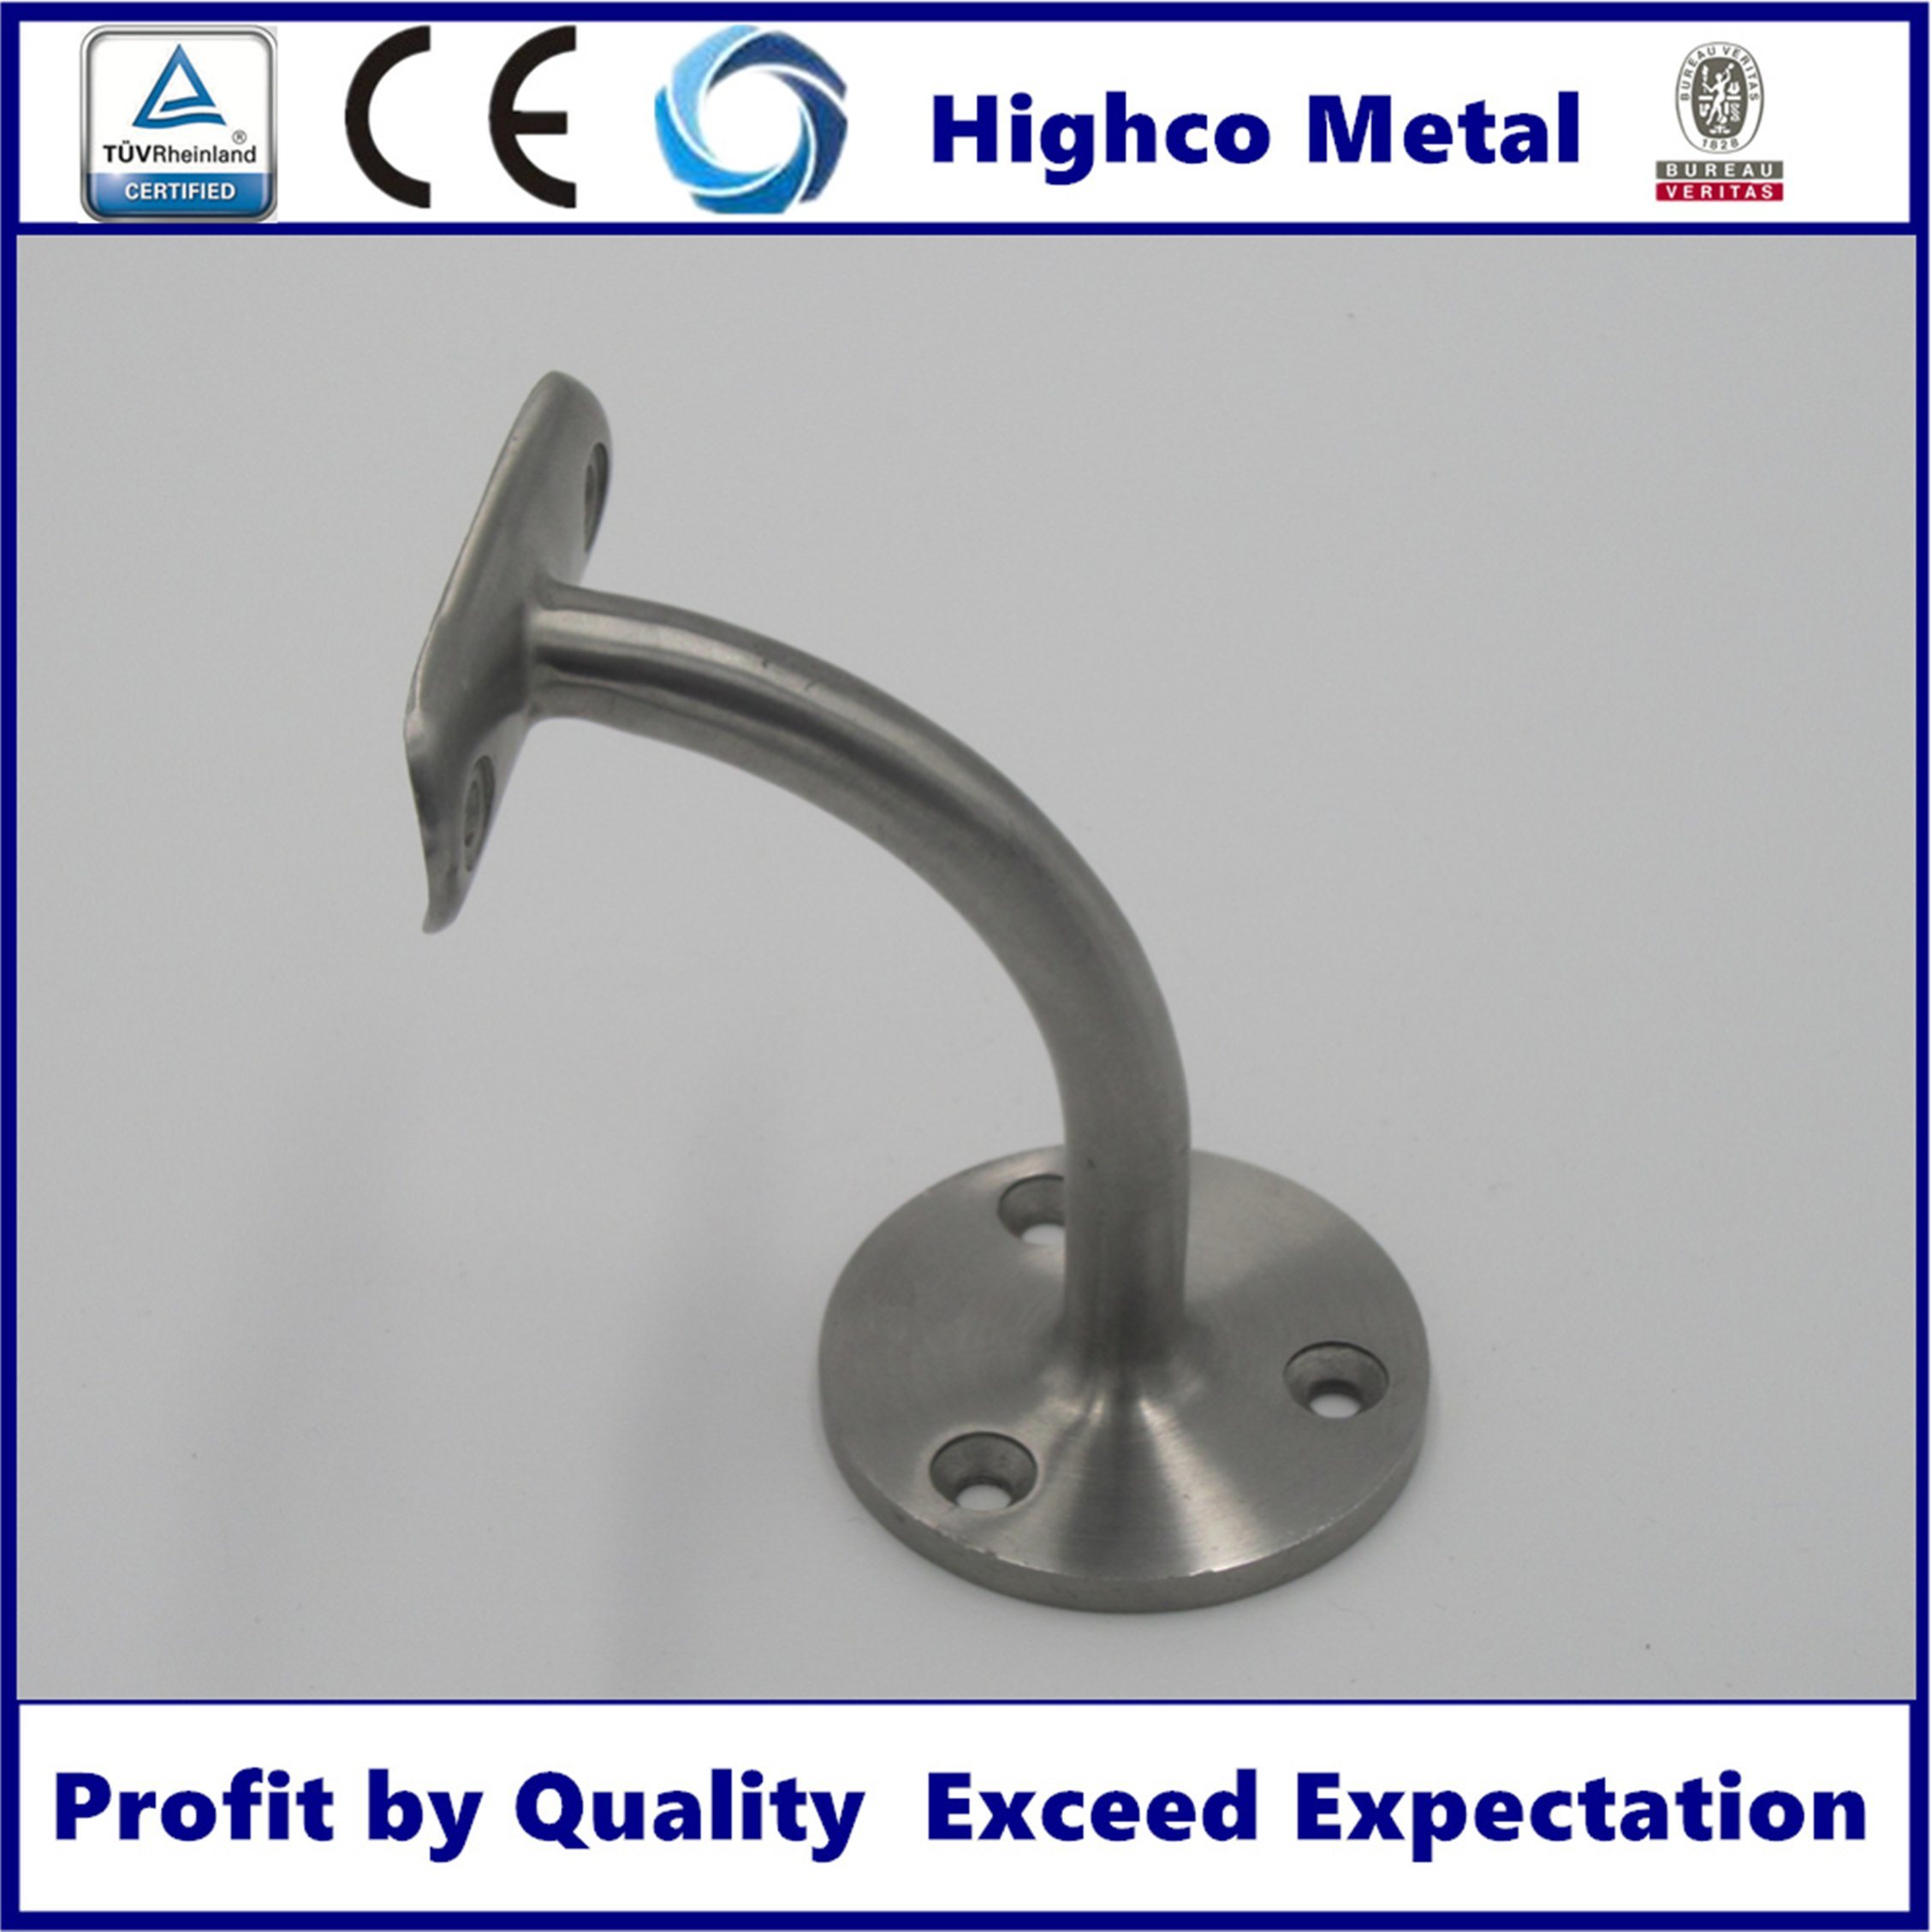 Stainless Steel Wall Mount Bracket for Railing and Balustrade